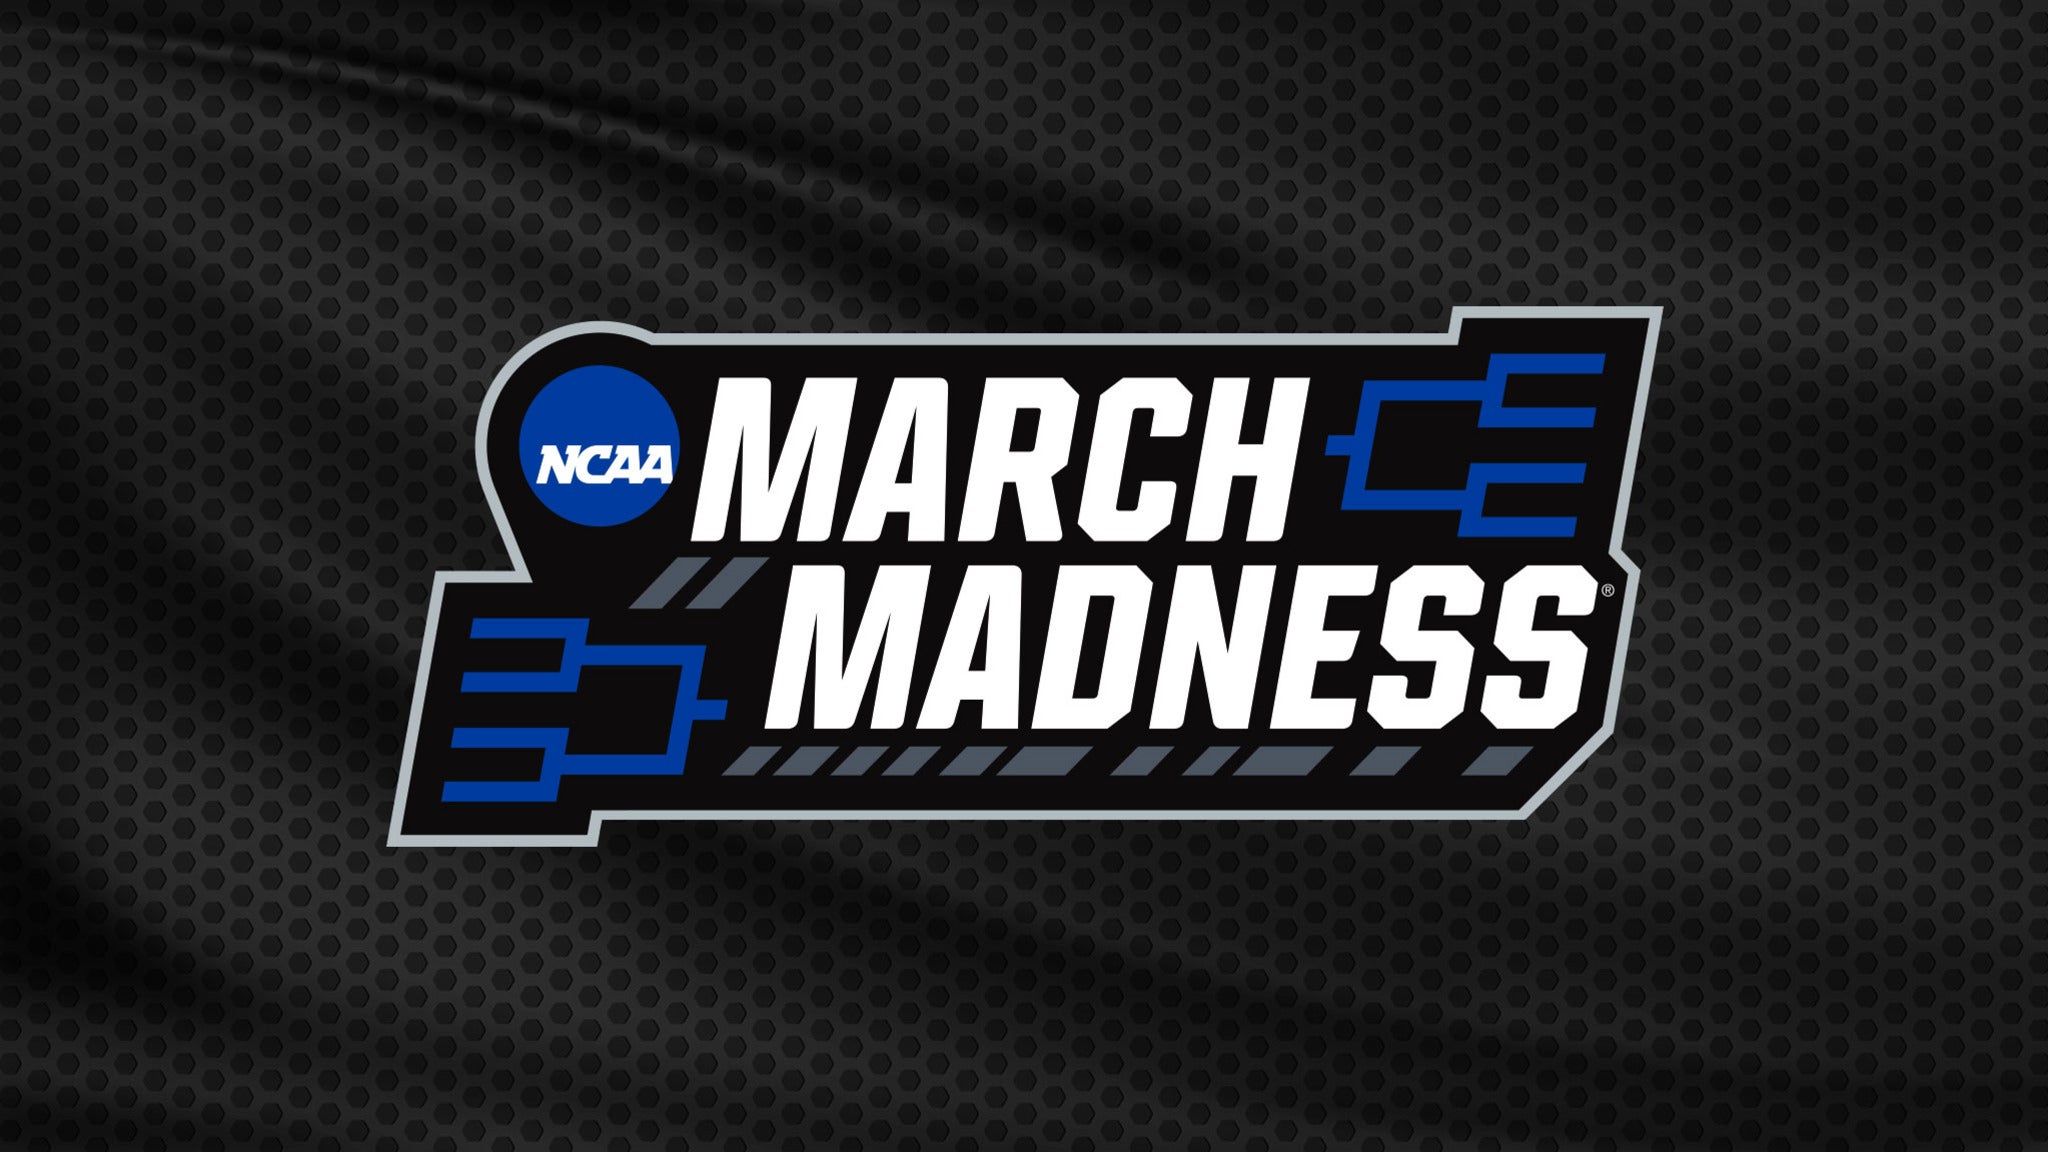 2021 NCAA March Madness Tickets and Men's Basketball Tournament